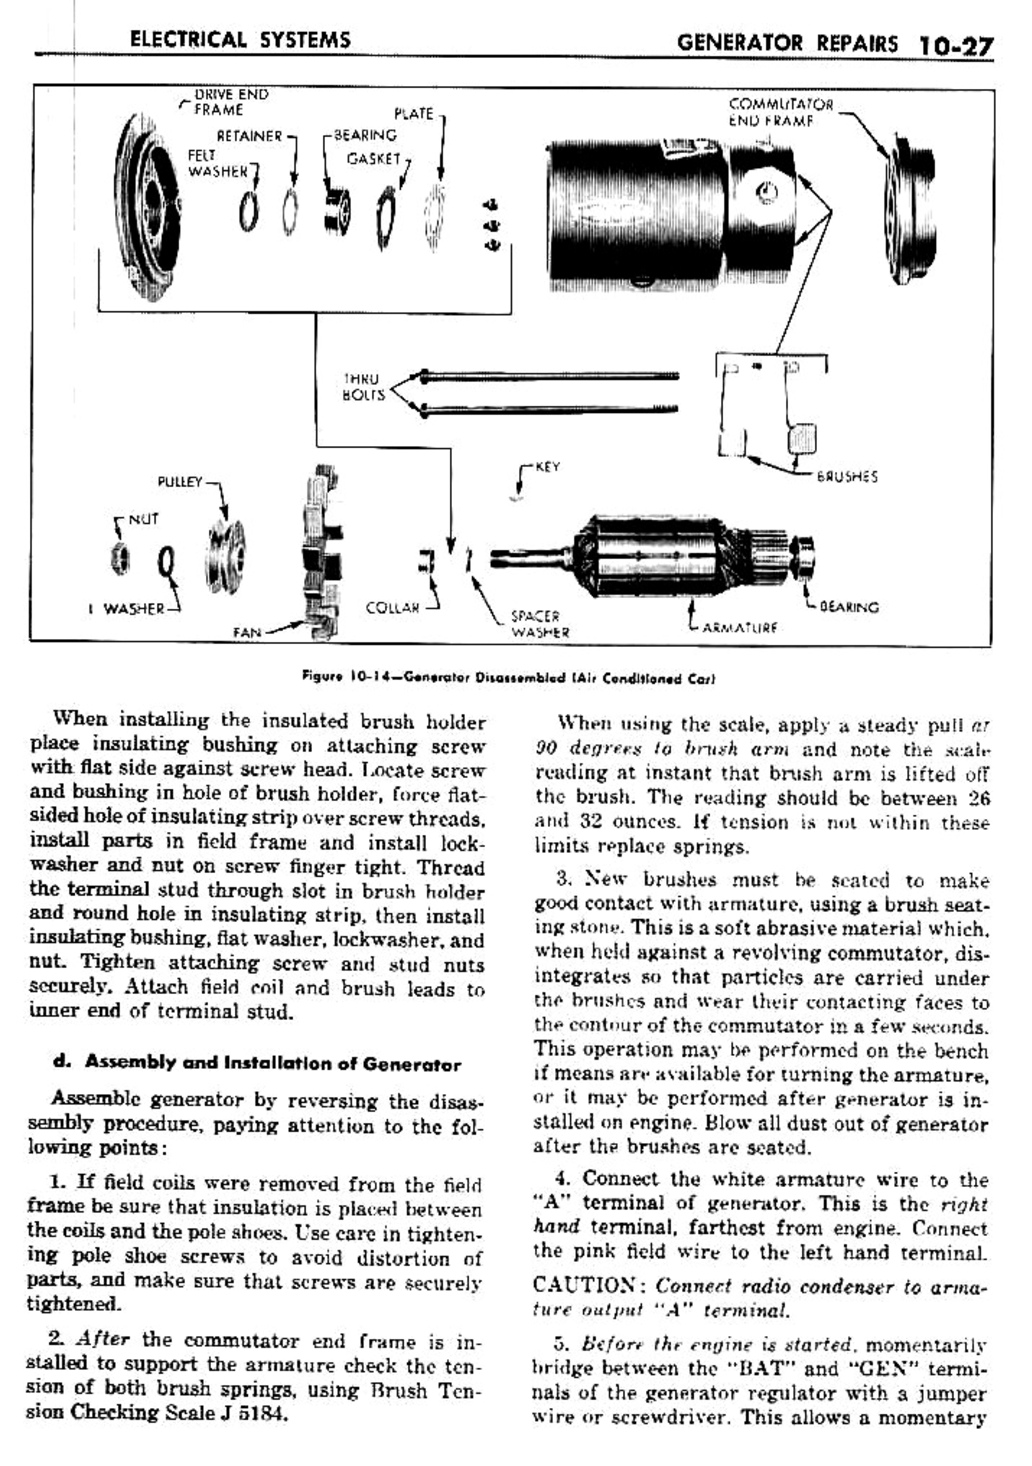 n_11 1959 Buick Shop Manual - Electrical Systems-027-027.jpg